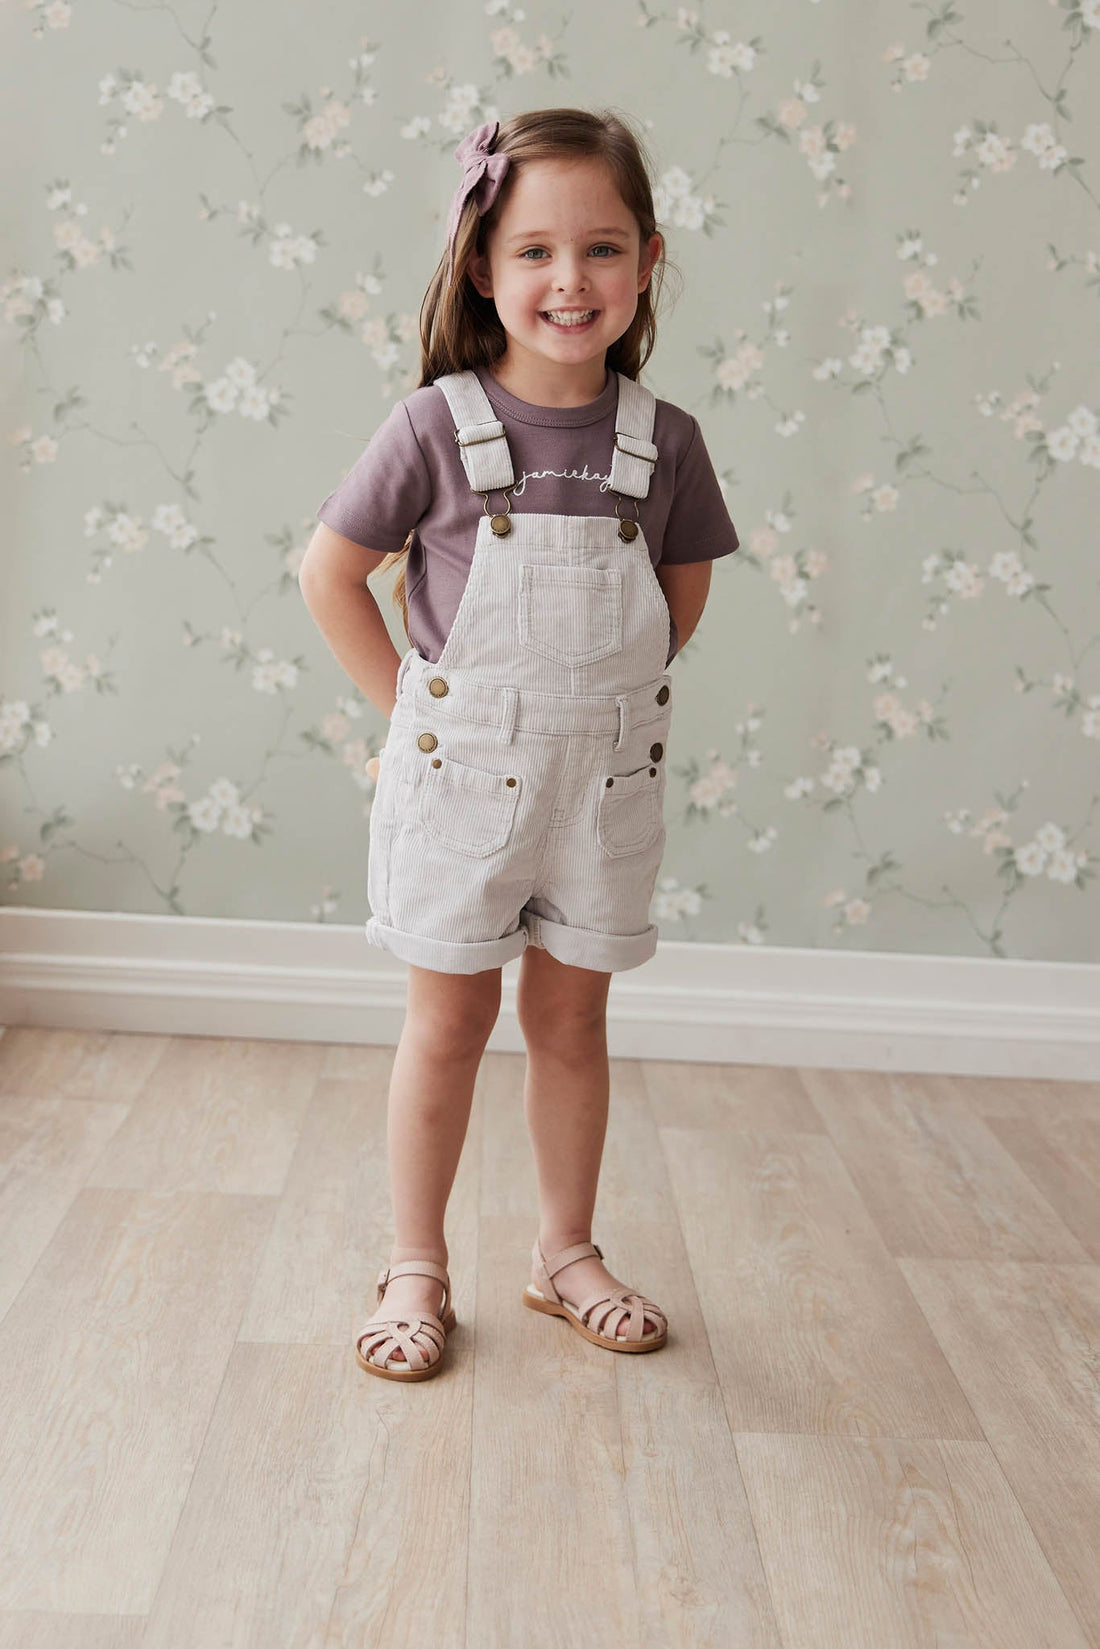 Chase Cord Short Overall - Luna Childrens Overall from Jamie Kay USA